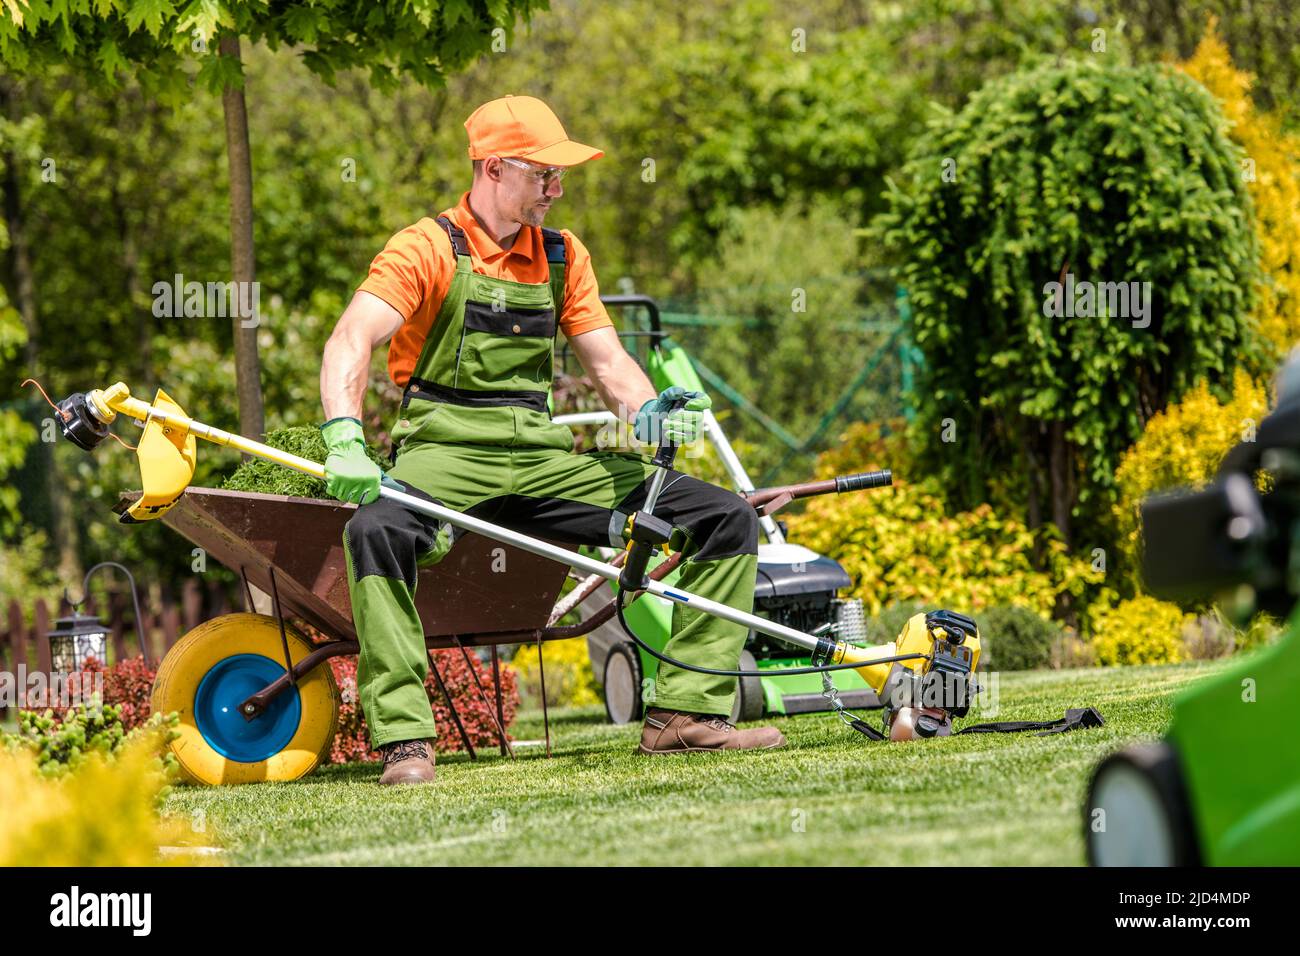 Caucasian Landscape Gardener Resting While Mowing the Lawn Sitting on the Wheelbarrow and Holding Professional Grass Trimmer in His Hands. Stock Photo